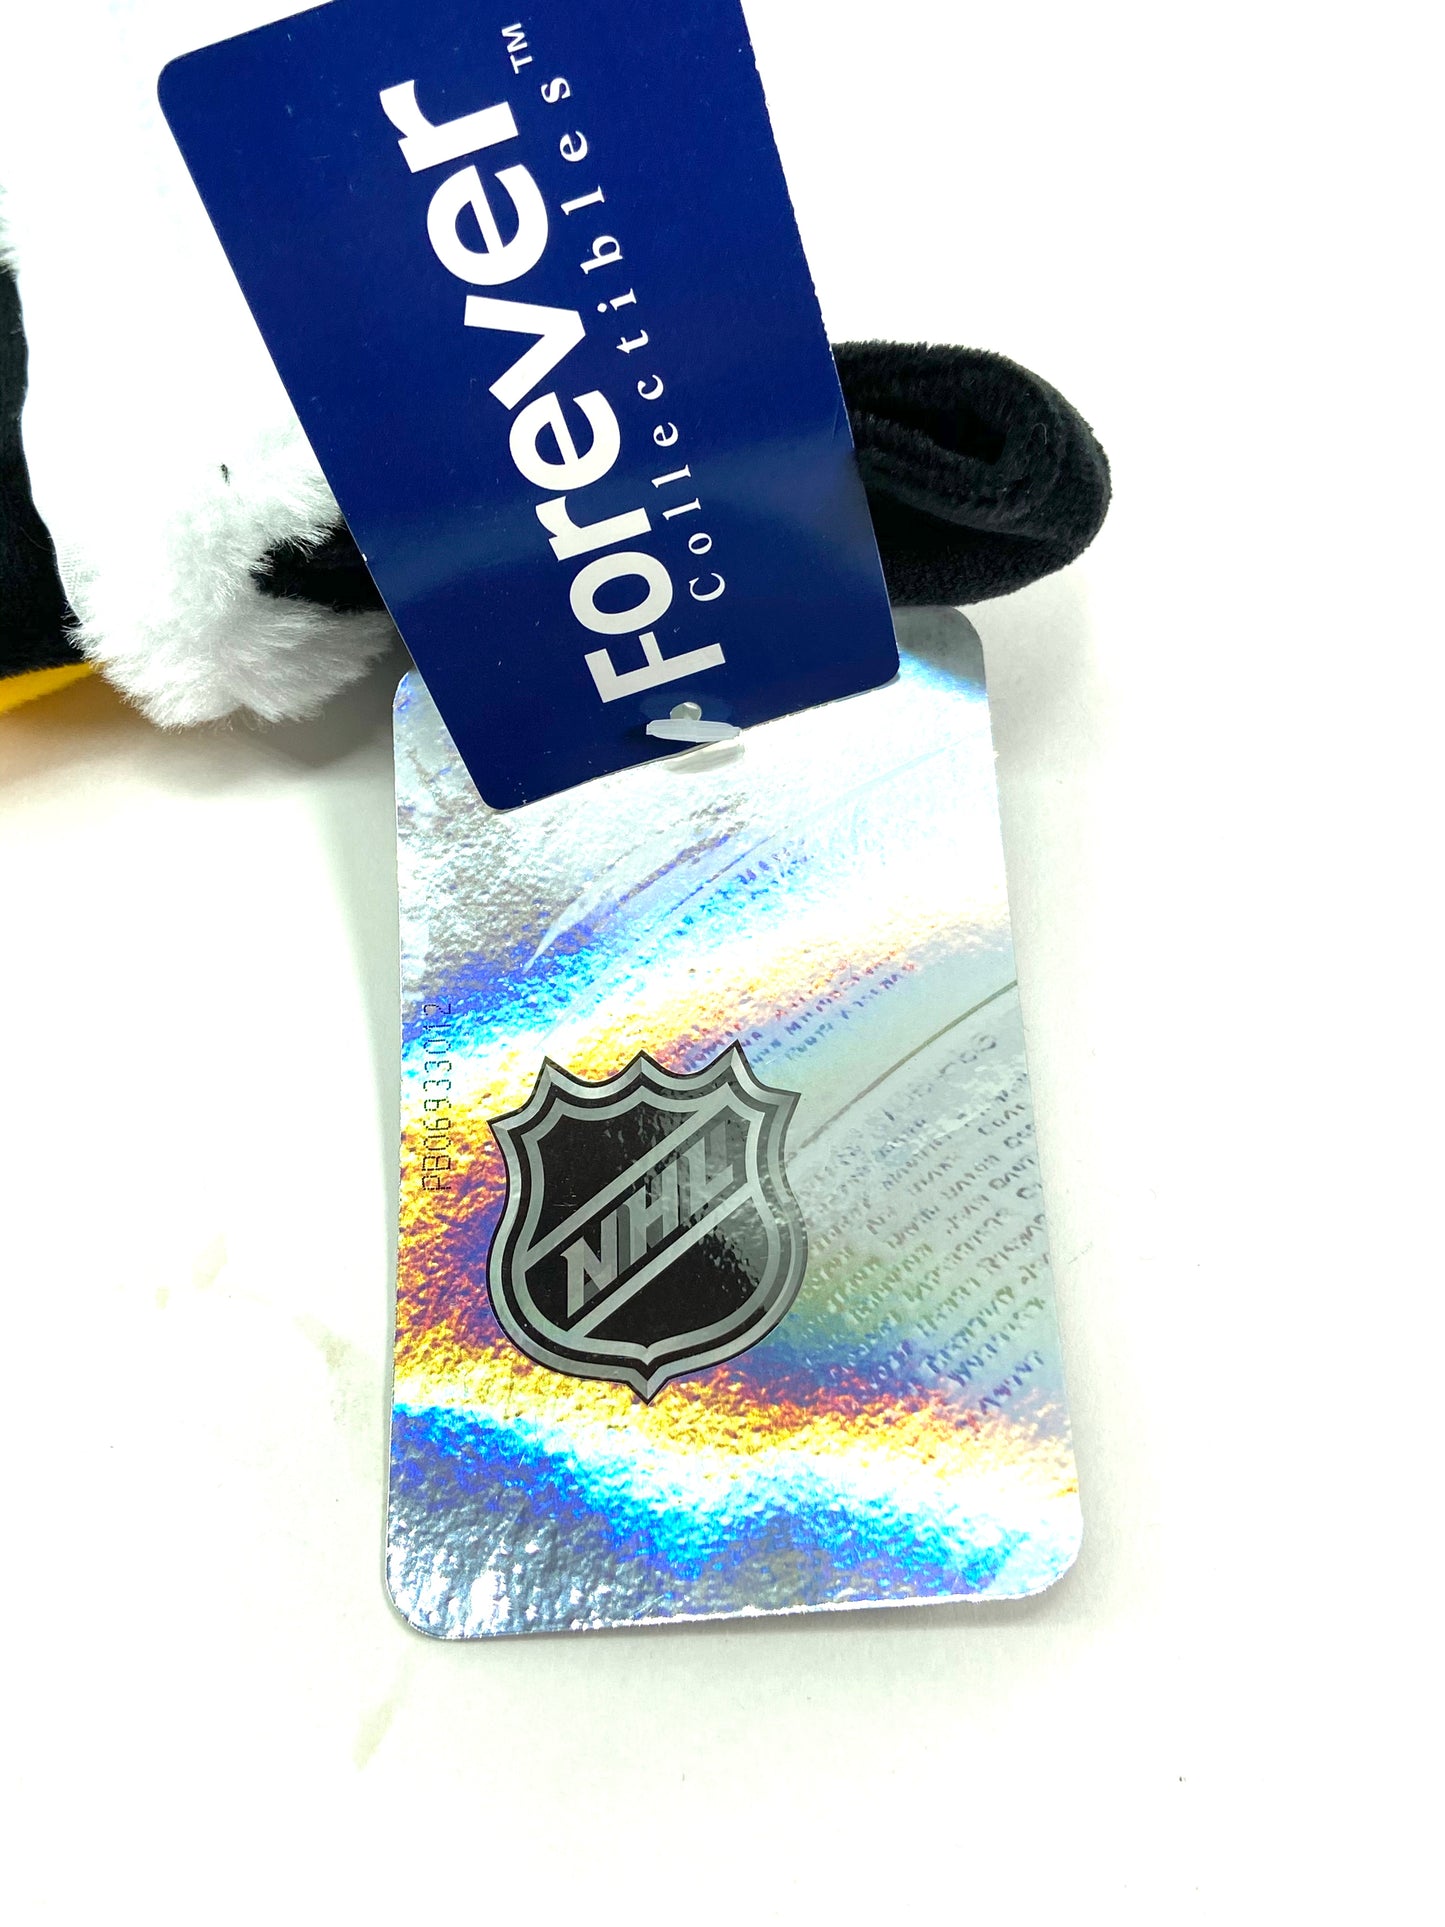 Pittsburgh Penguins 2016 NHL Champions NOS Christmas Stocking by Forever Collectibles